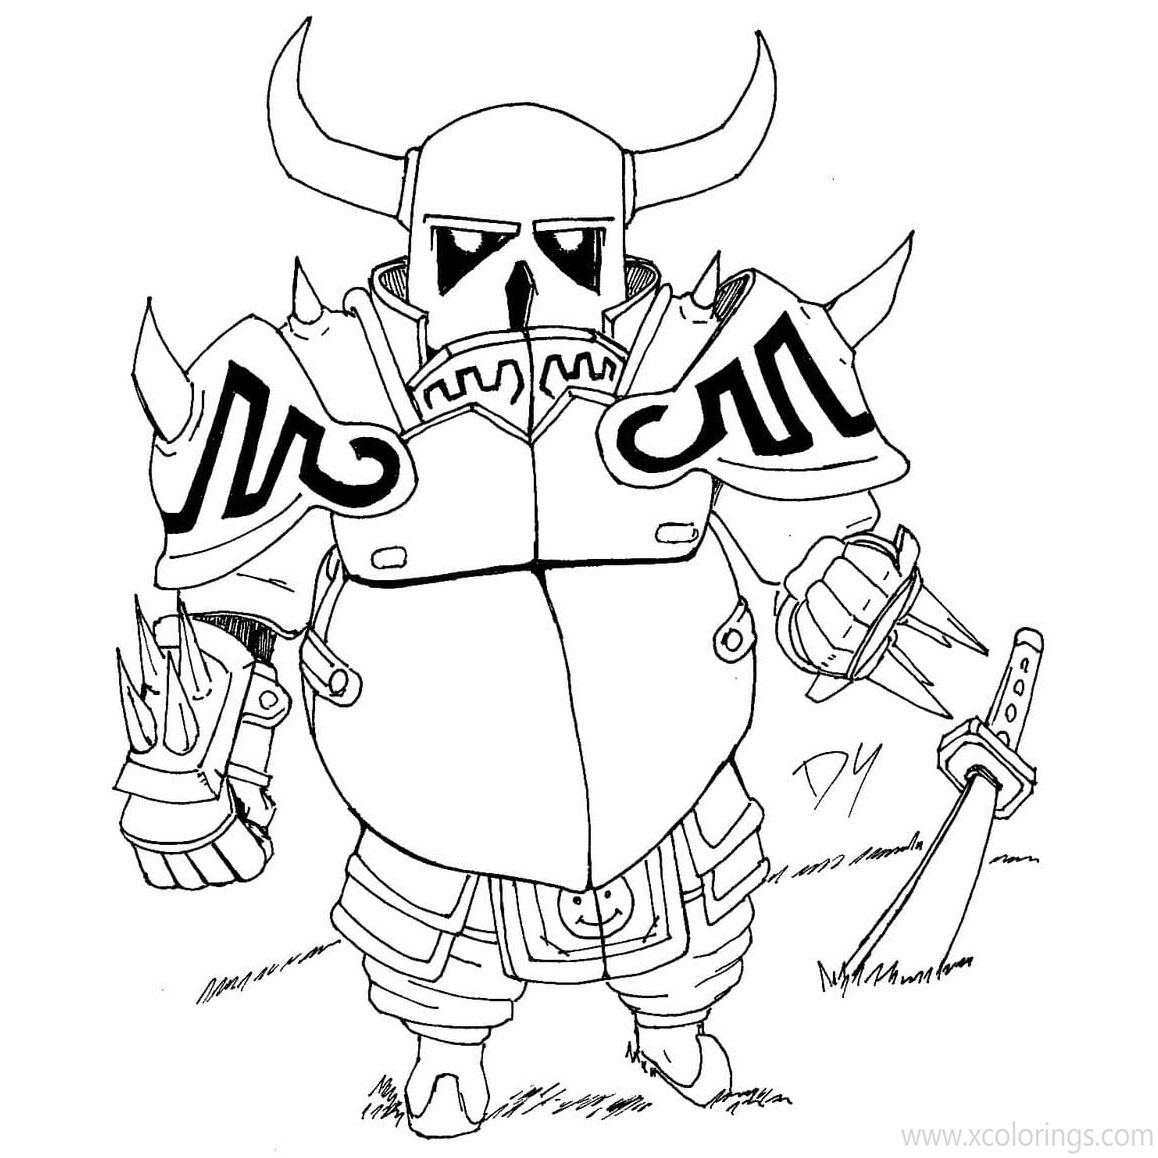 Free Pekka from Clash Royale Coloring Pages Fan Art printable